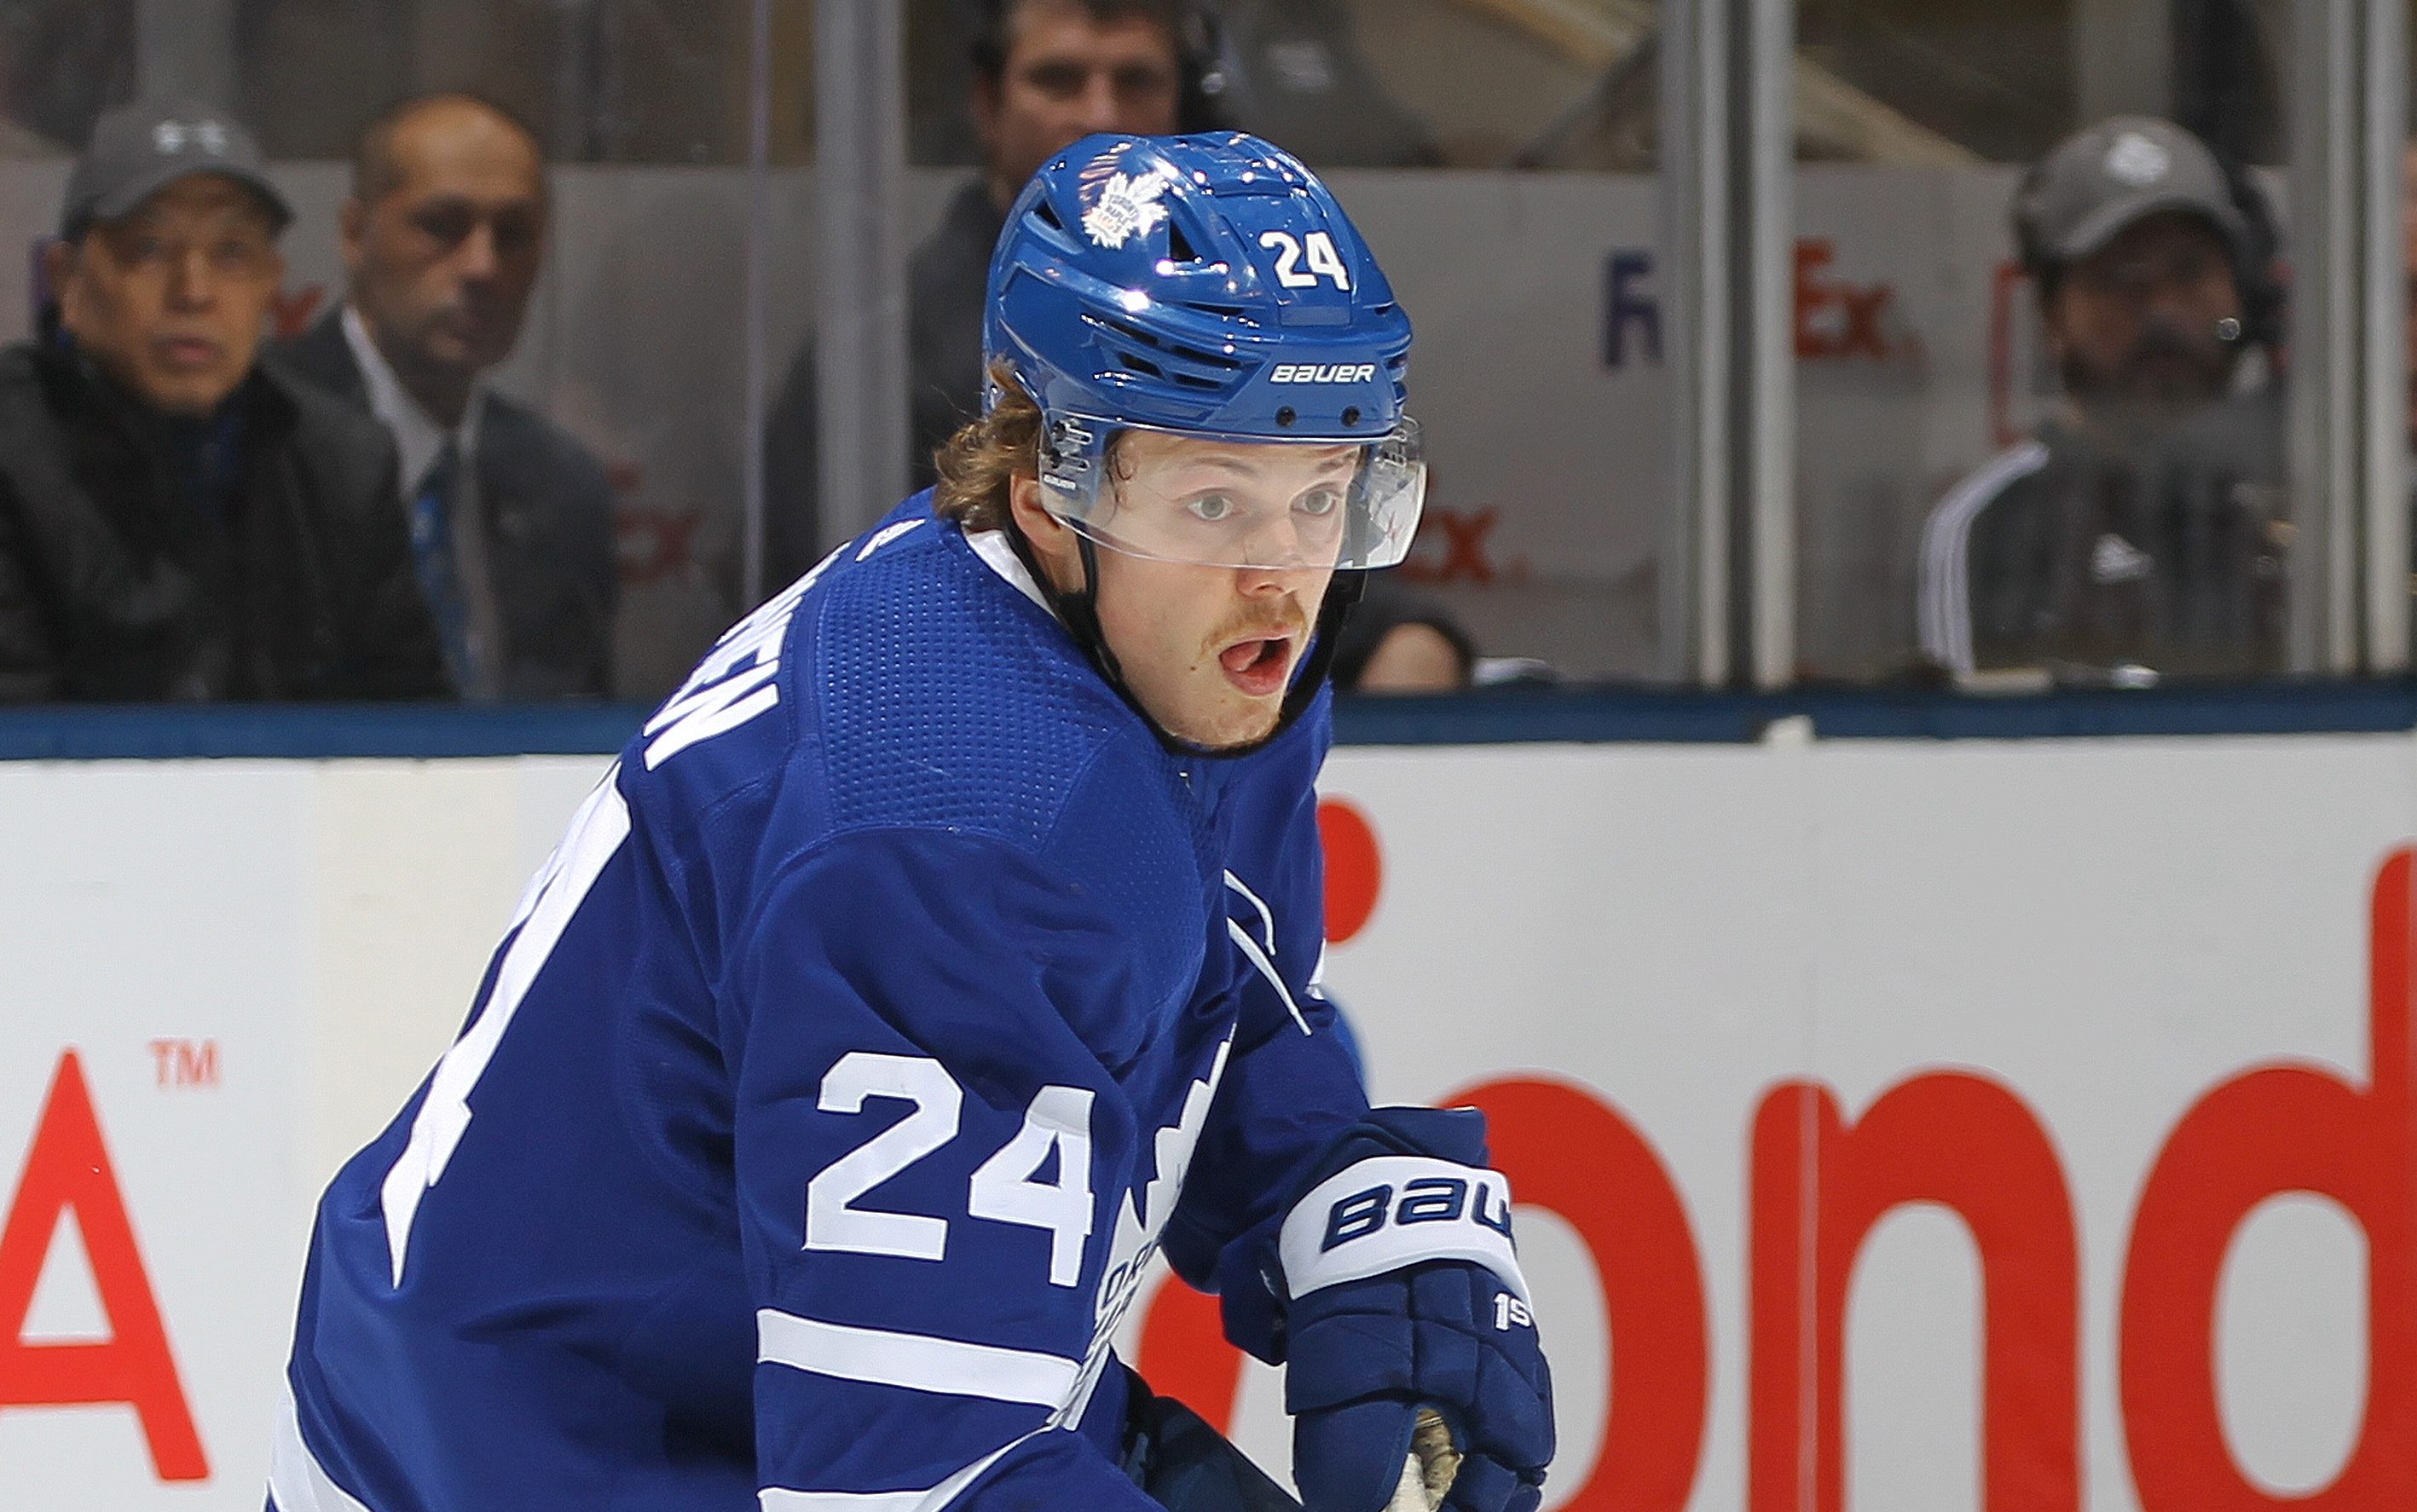 New Blue Kasperi Kapanen is getting a great chance to revive career